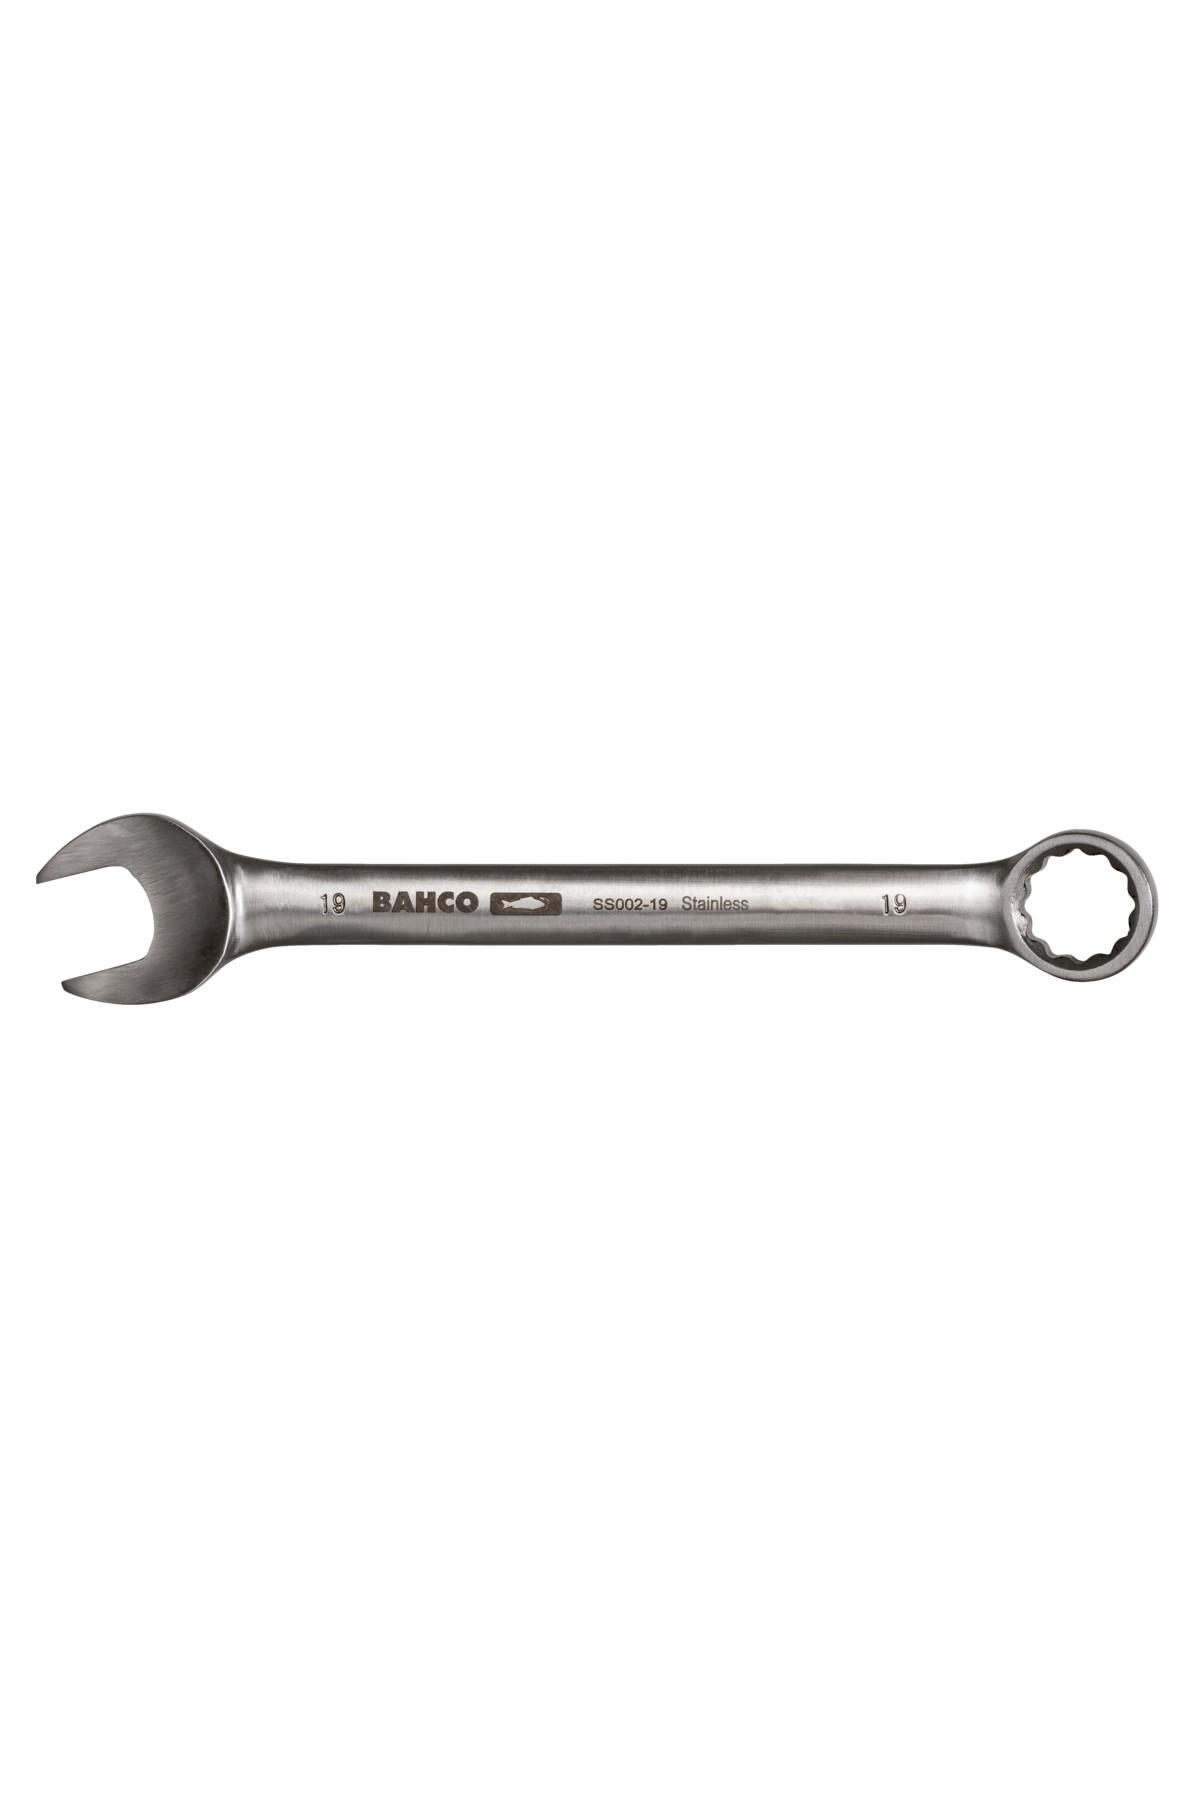 Ring spanner stainless steel SS003 7/16